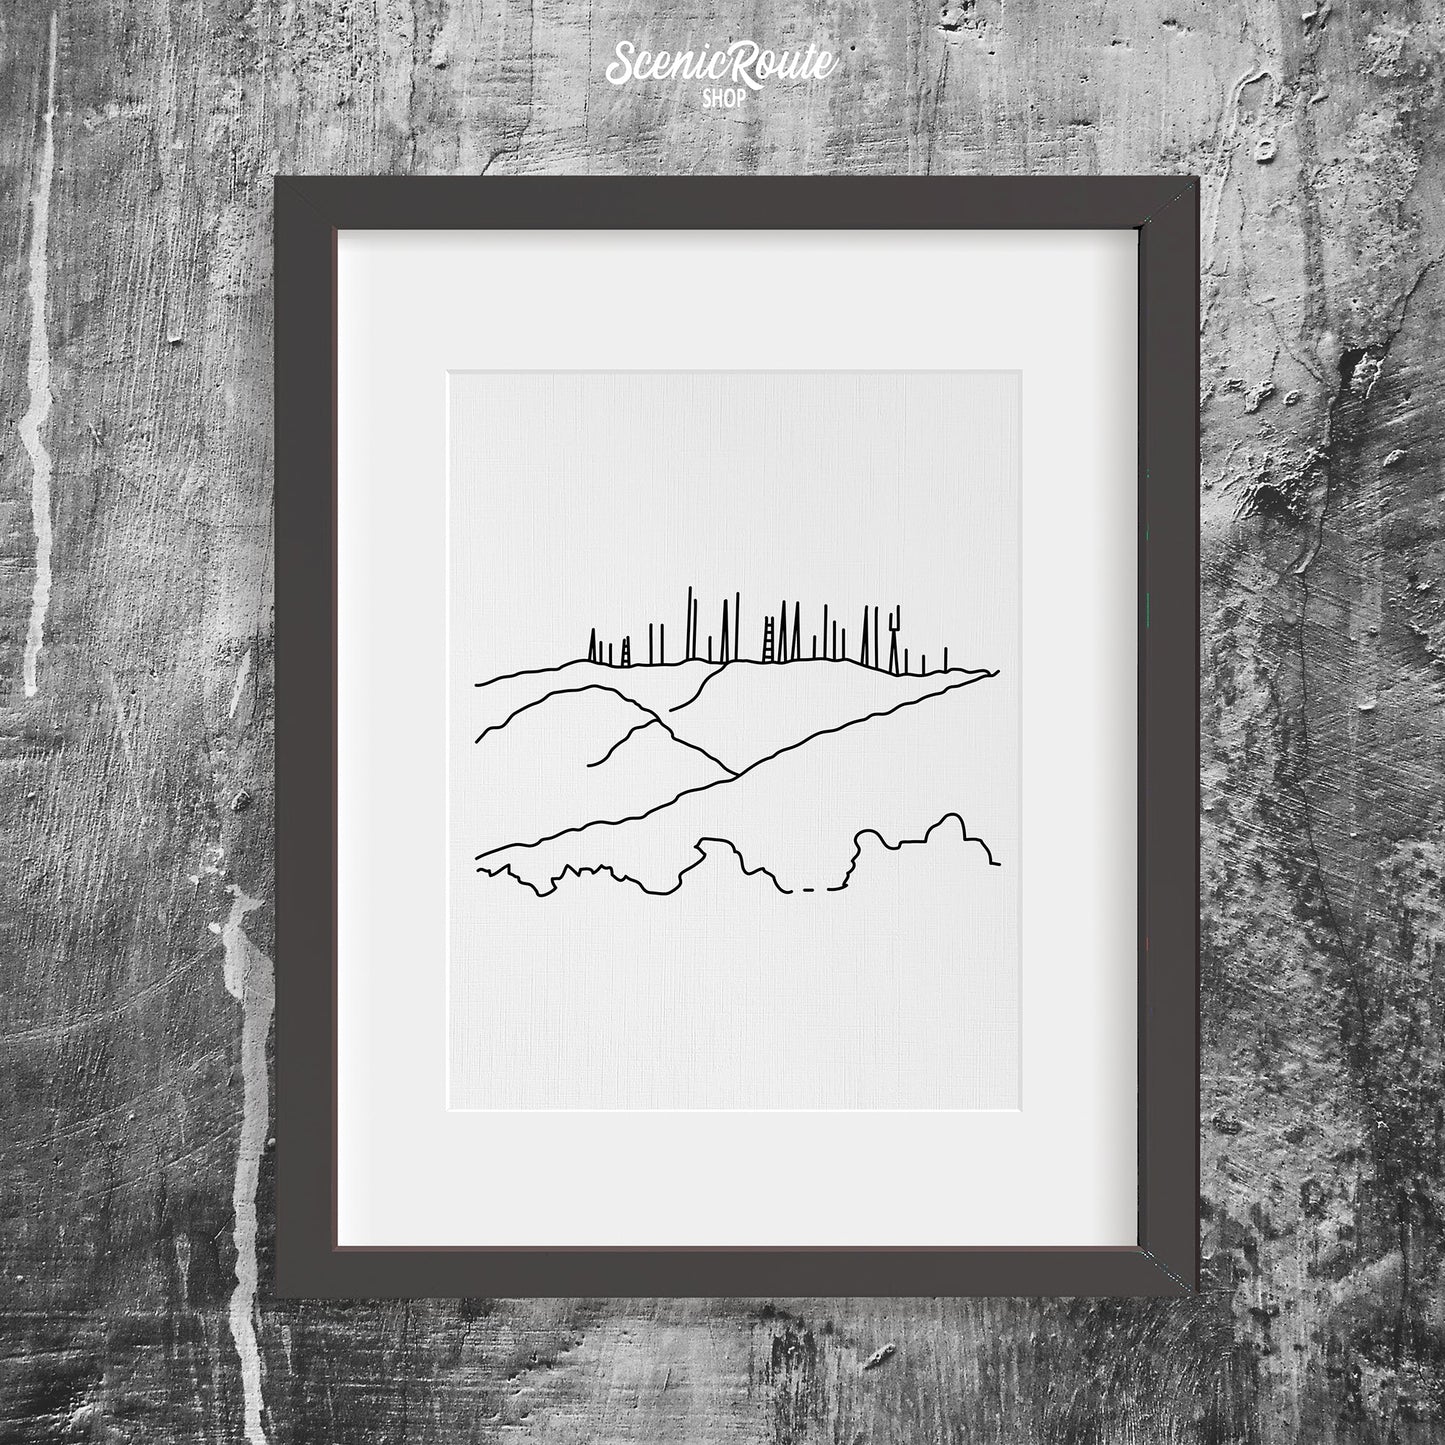 A framed line art drawing of Phoenix South Mountain on a concrete wall